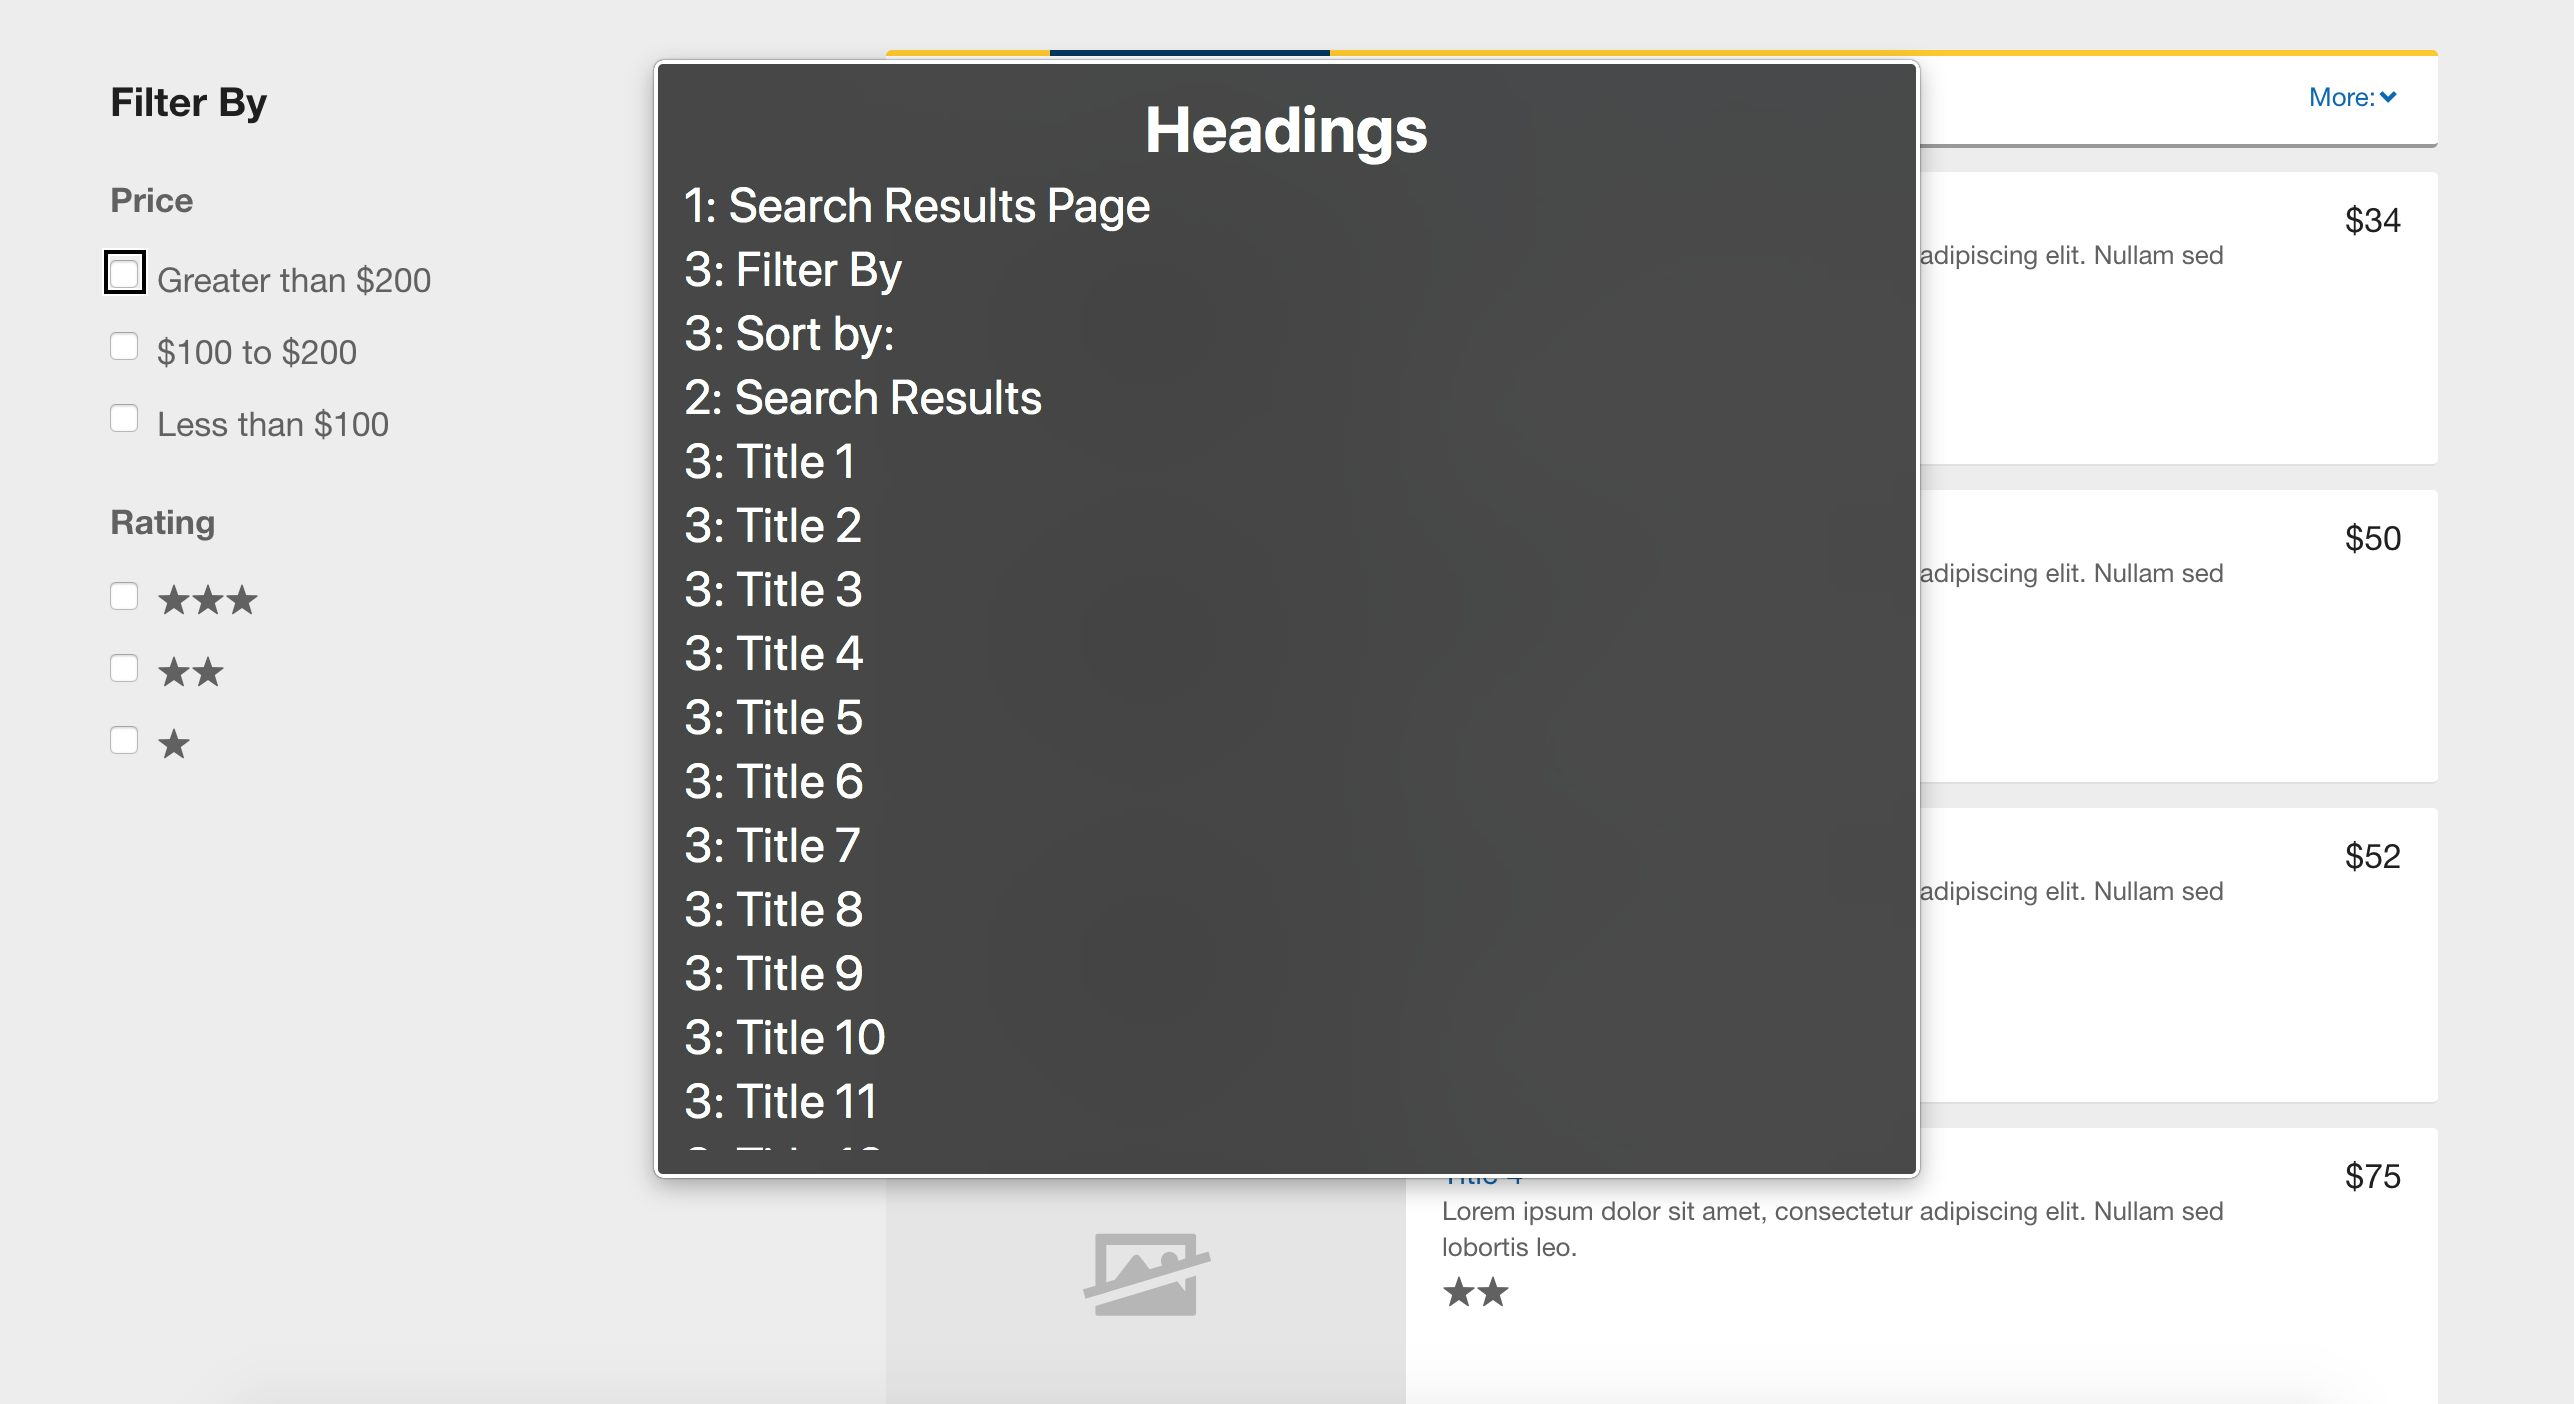 Headings on an example search results page that skip from h1 to h3